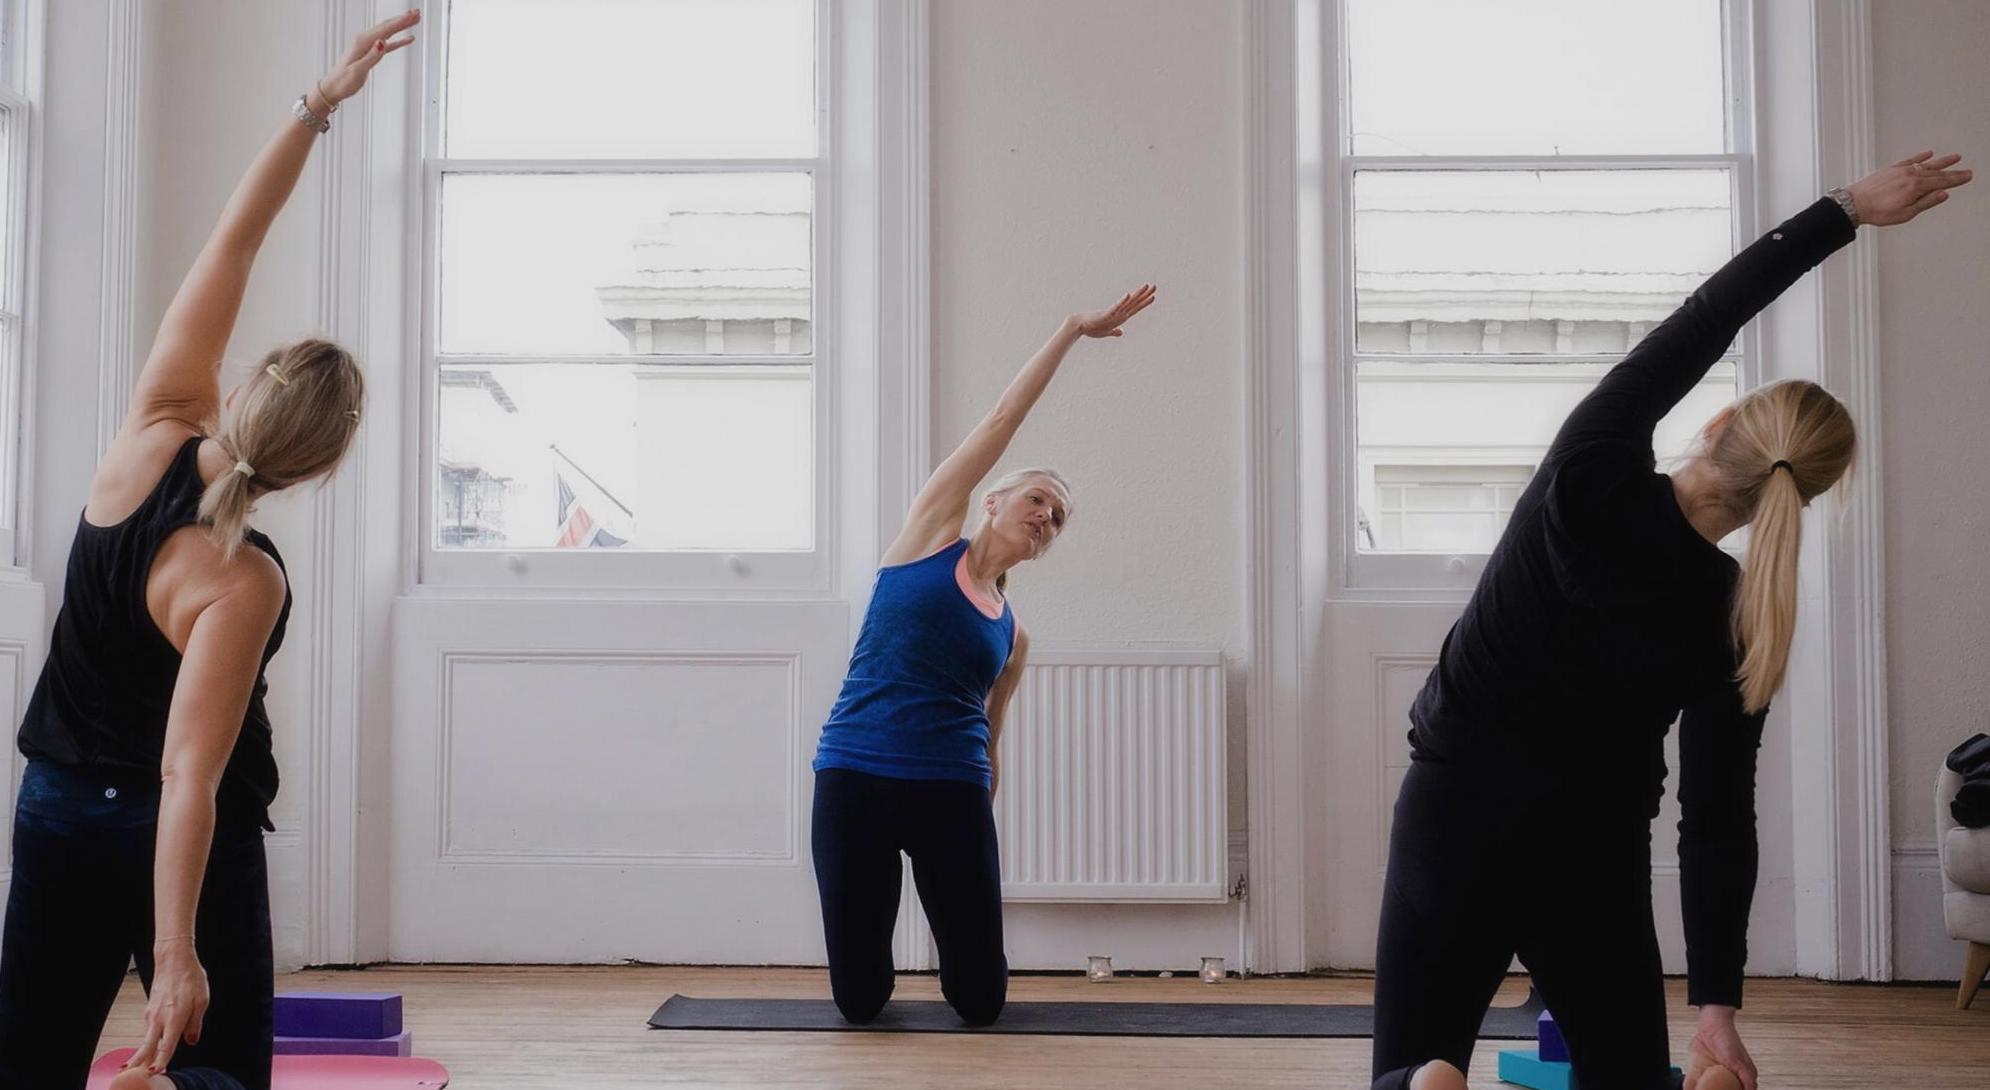 Vicky fox teaching yoga for breast cancer